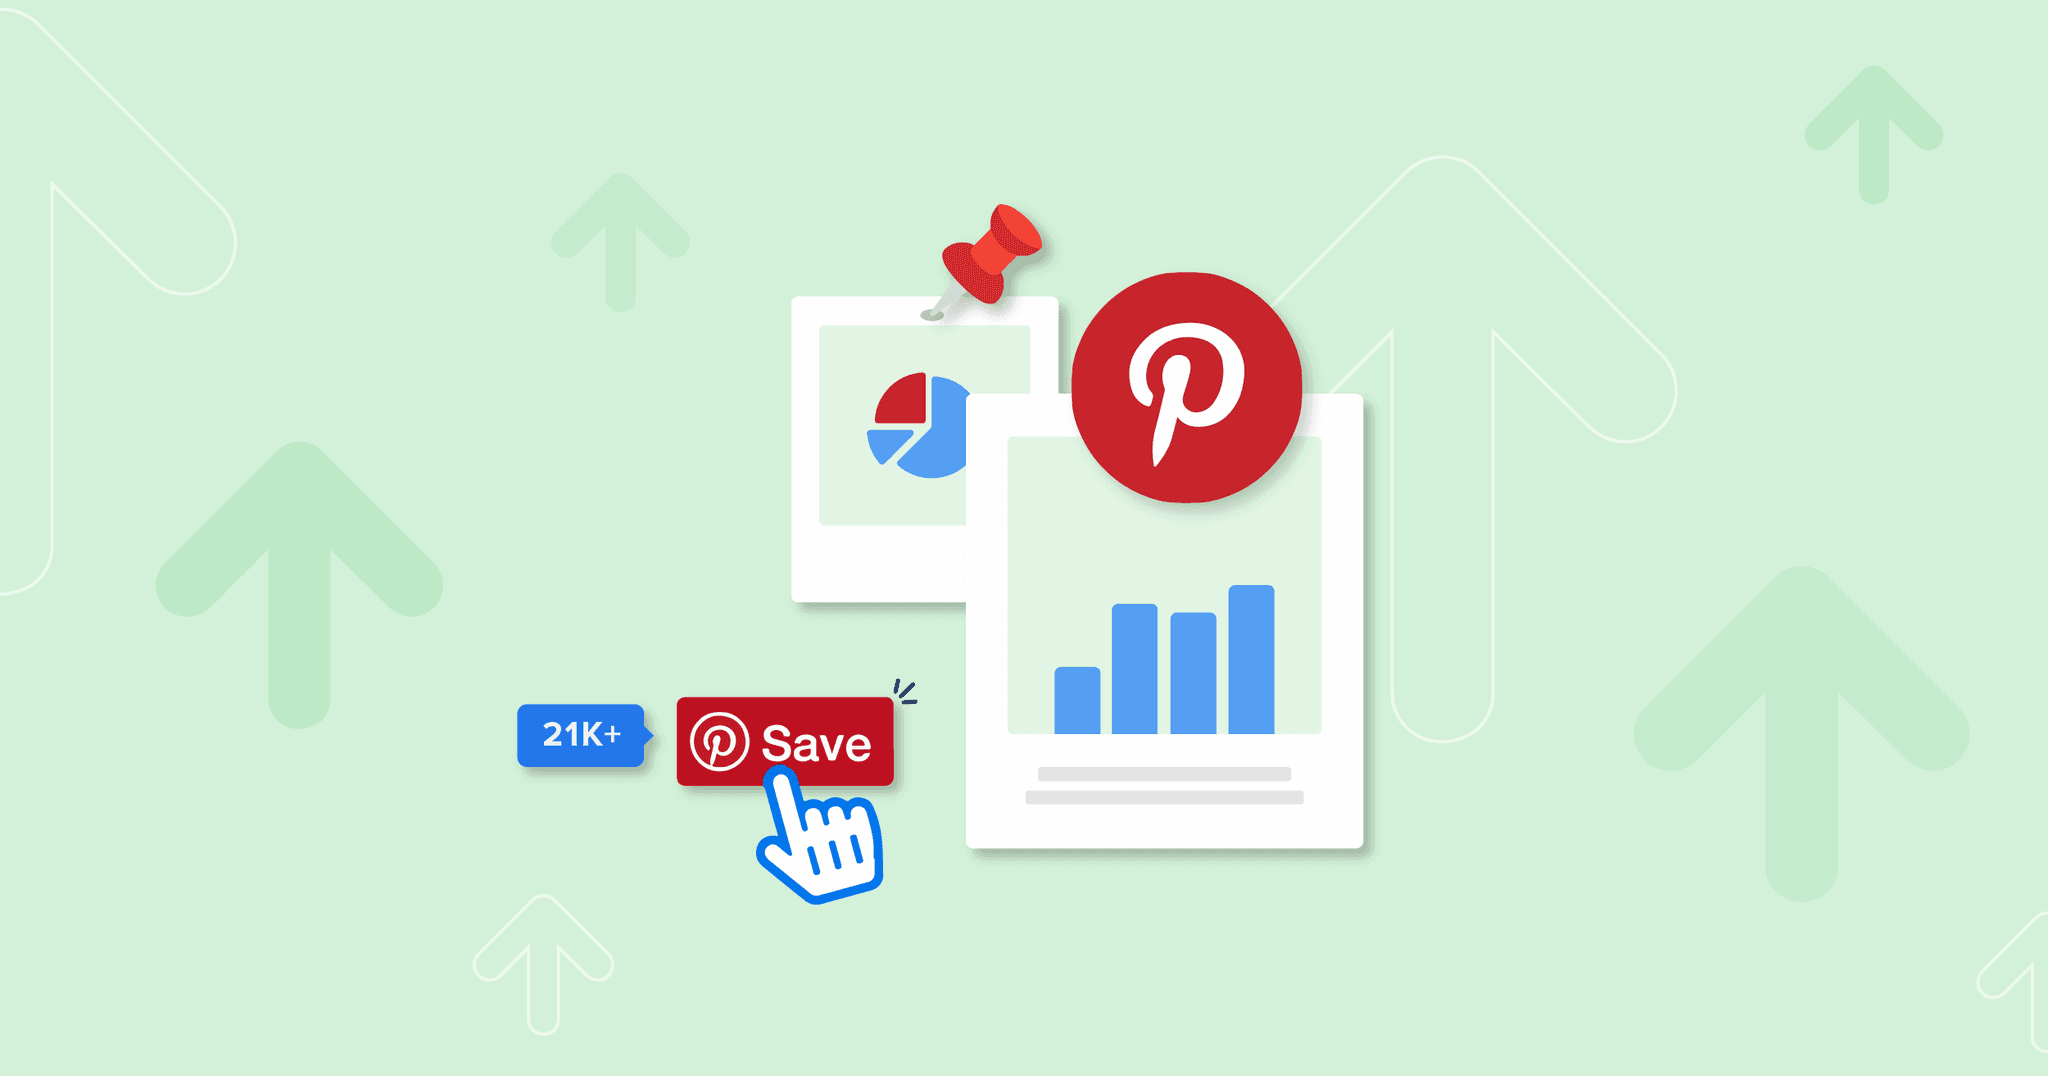 Guide to Pinterest Marketing